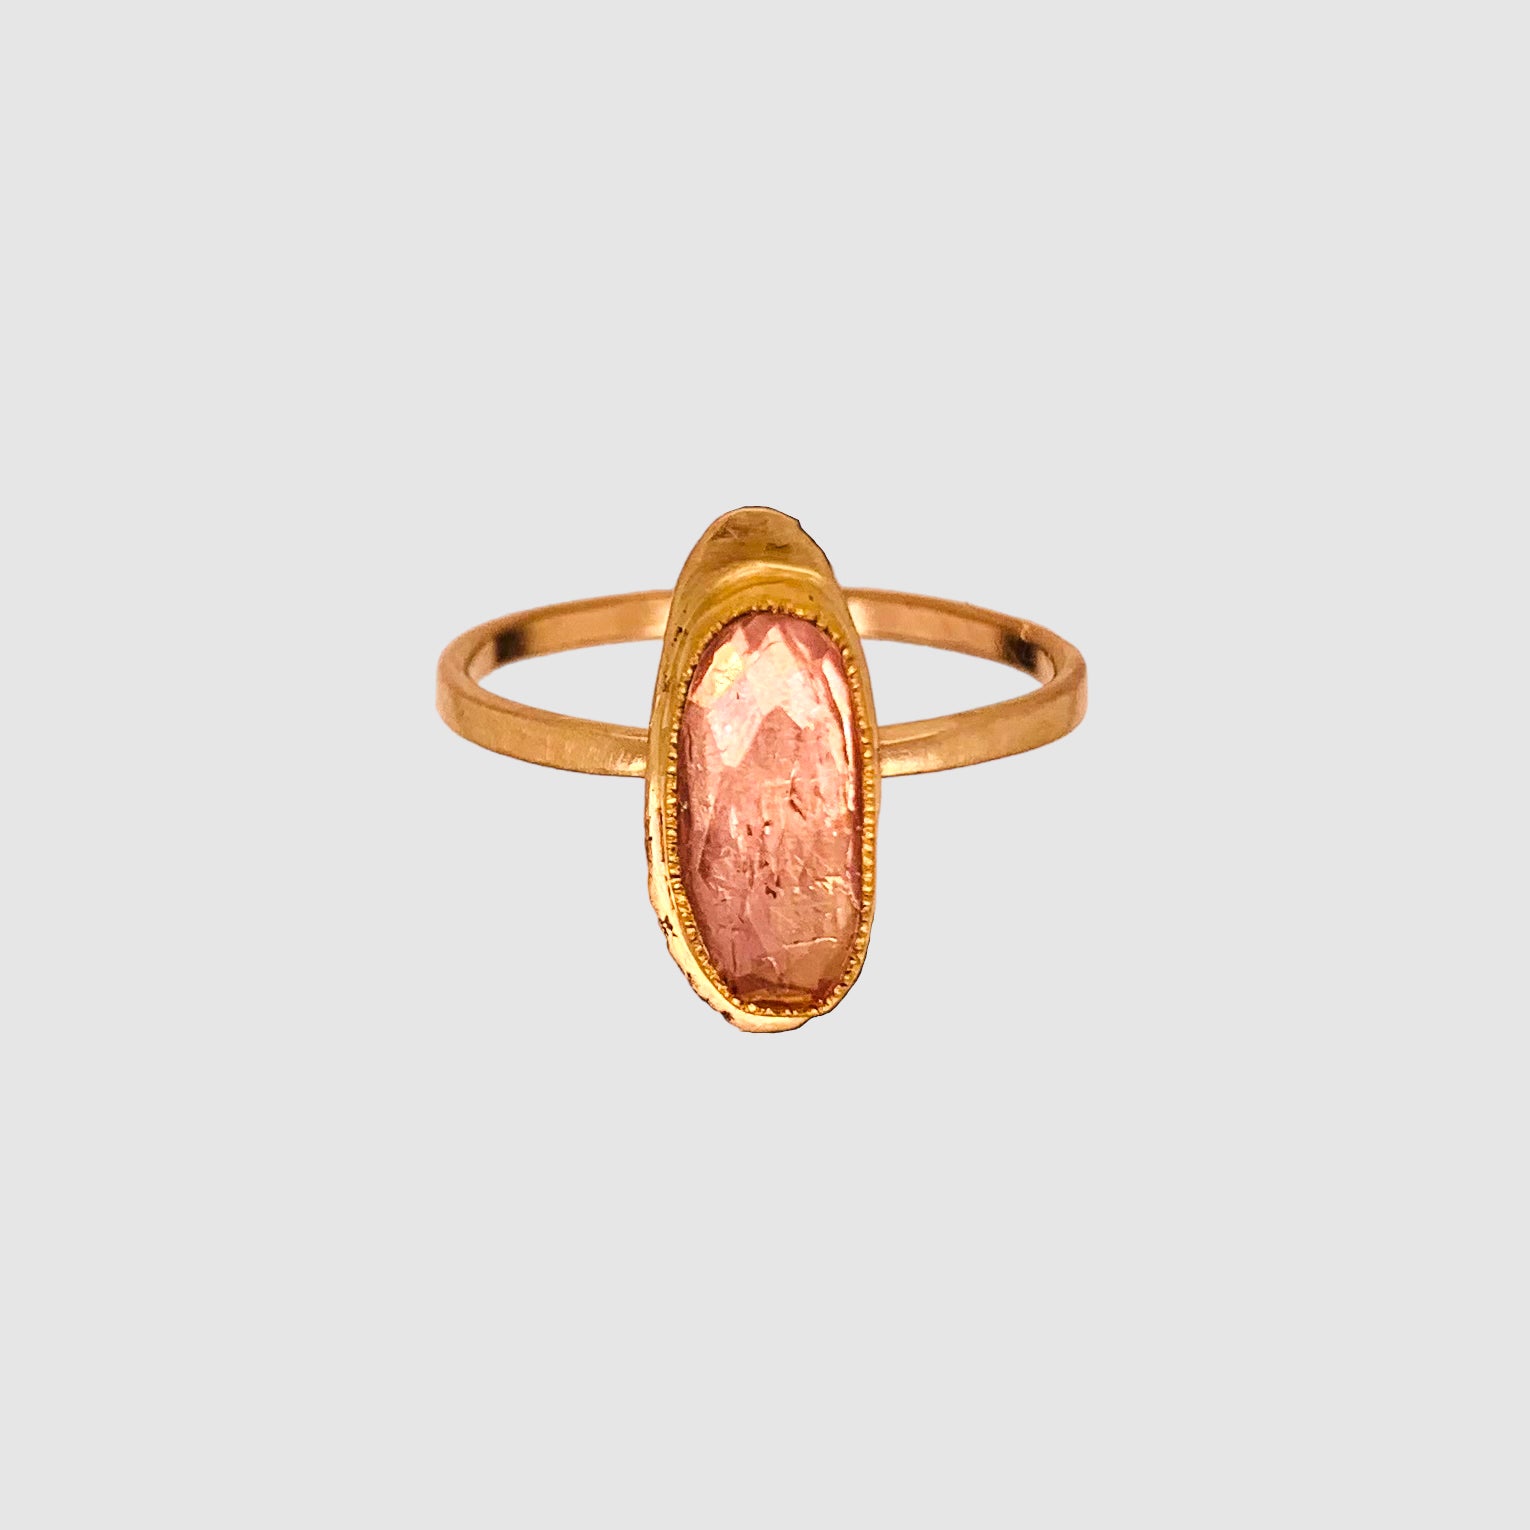 HEIRLOOM RING // SIMPLE // GOLD // SMALL  PRECIOUS TOPAZ